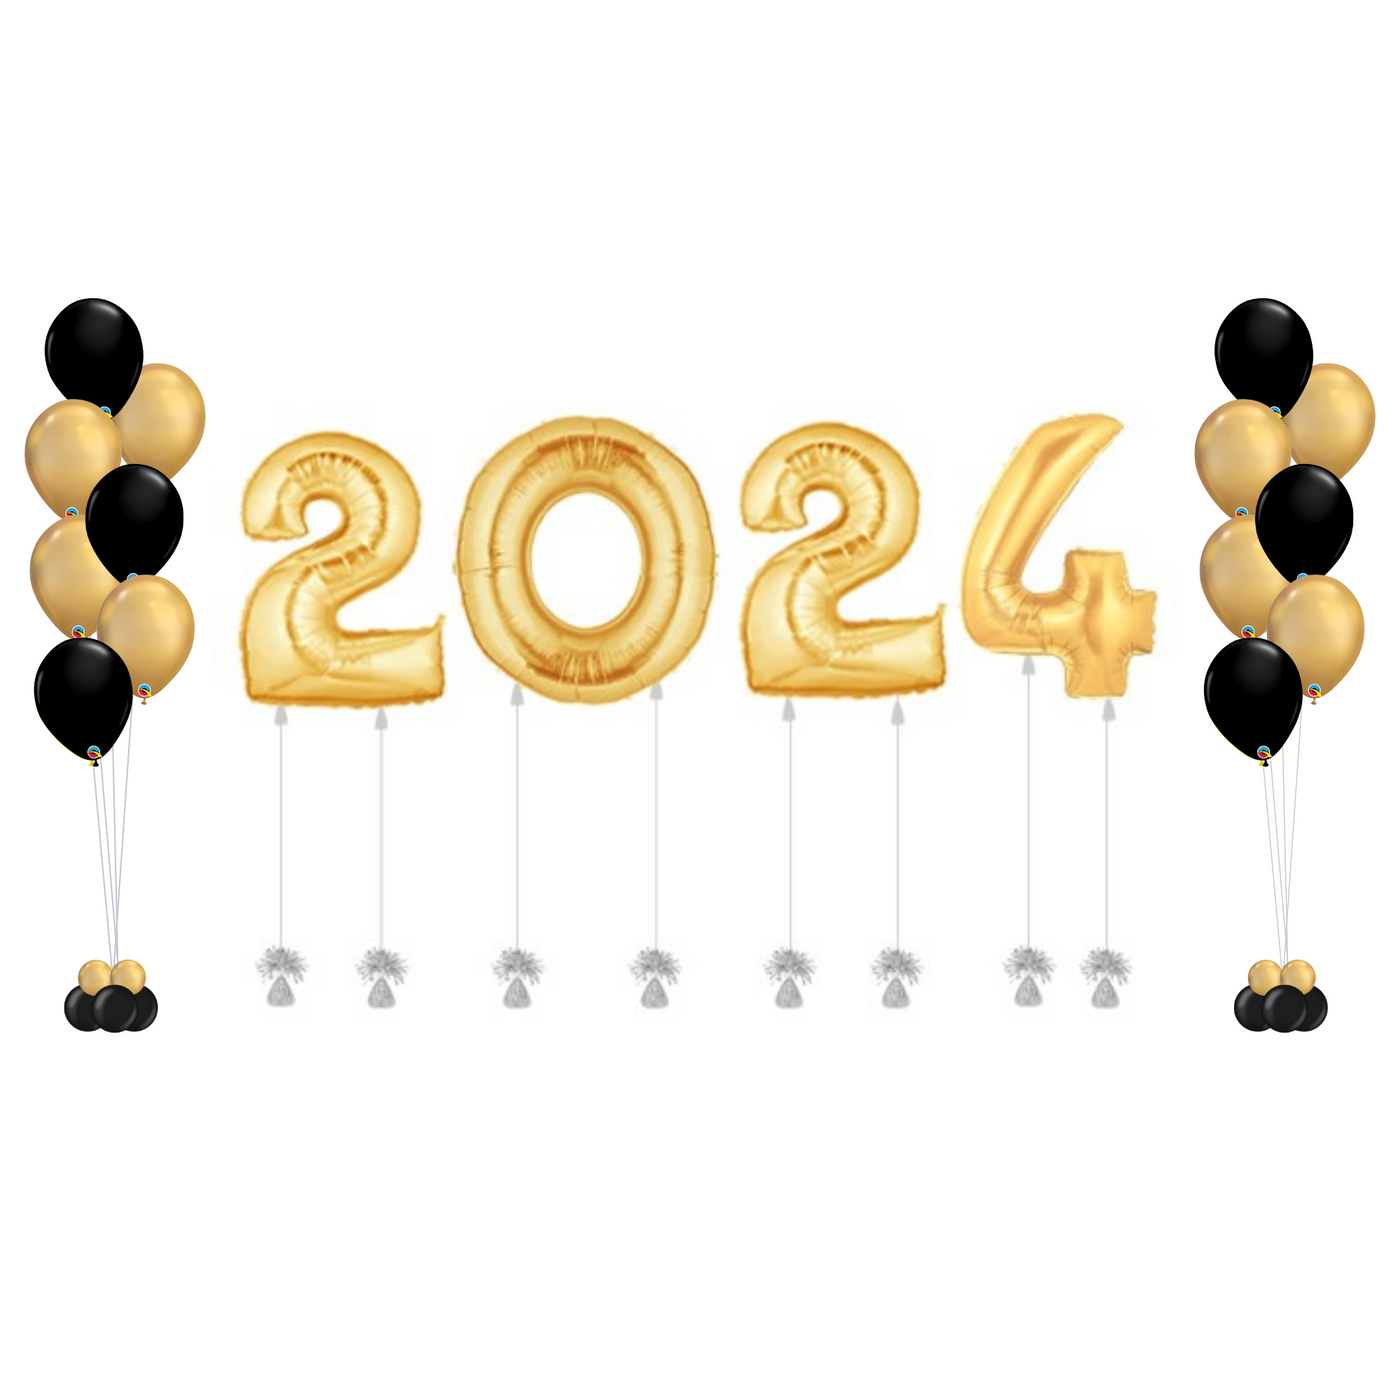 Gold "2024" New Year's Eve Balloons With Bouquets